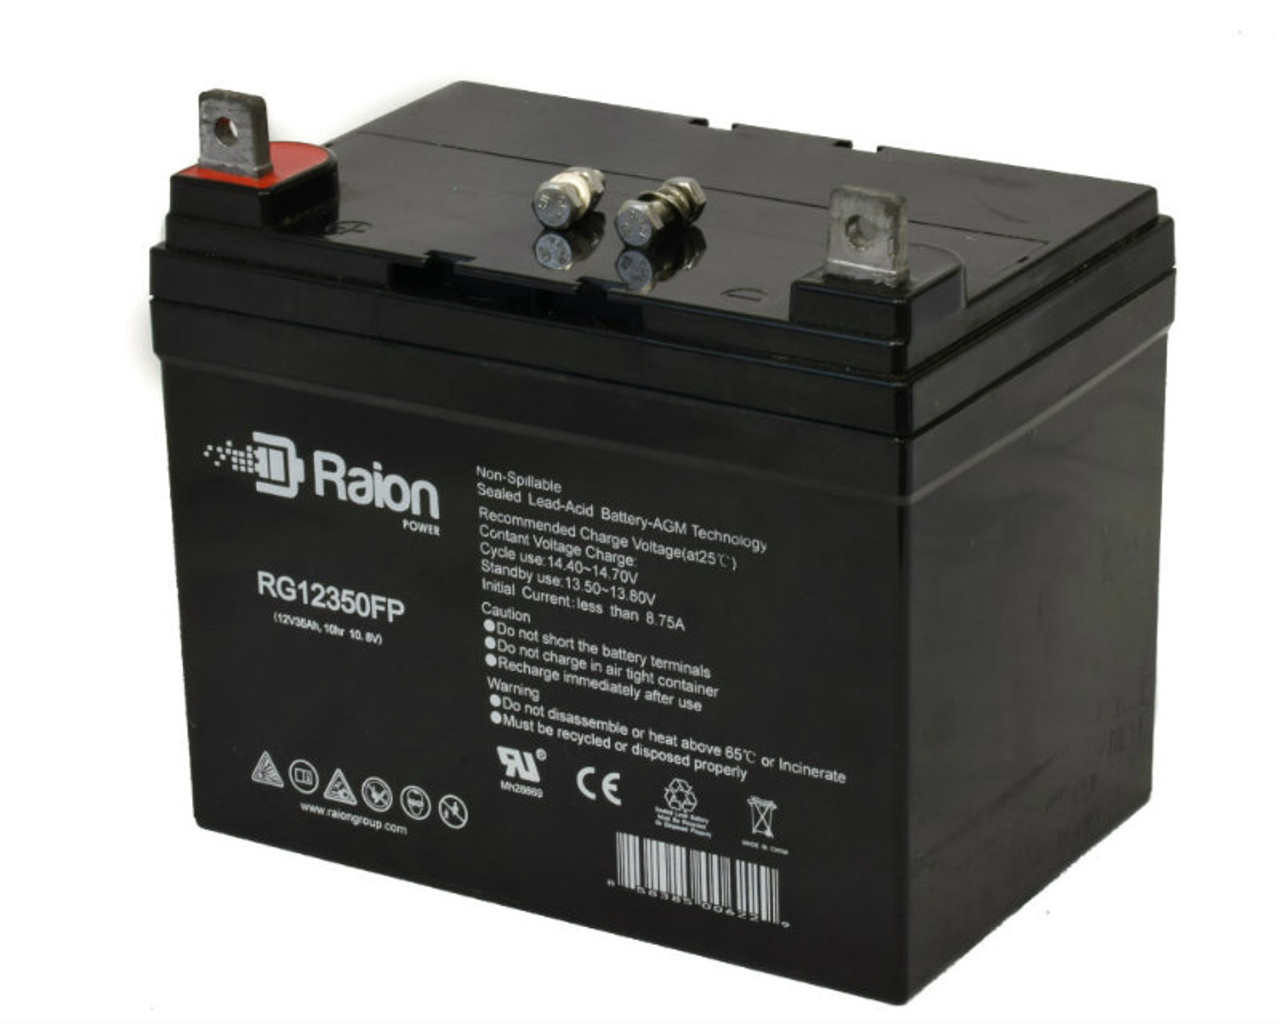 Raion Power Replacement 12V 35Ah Battery for CBB NP33-12 - 1 Pack